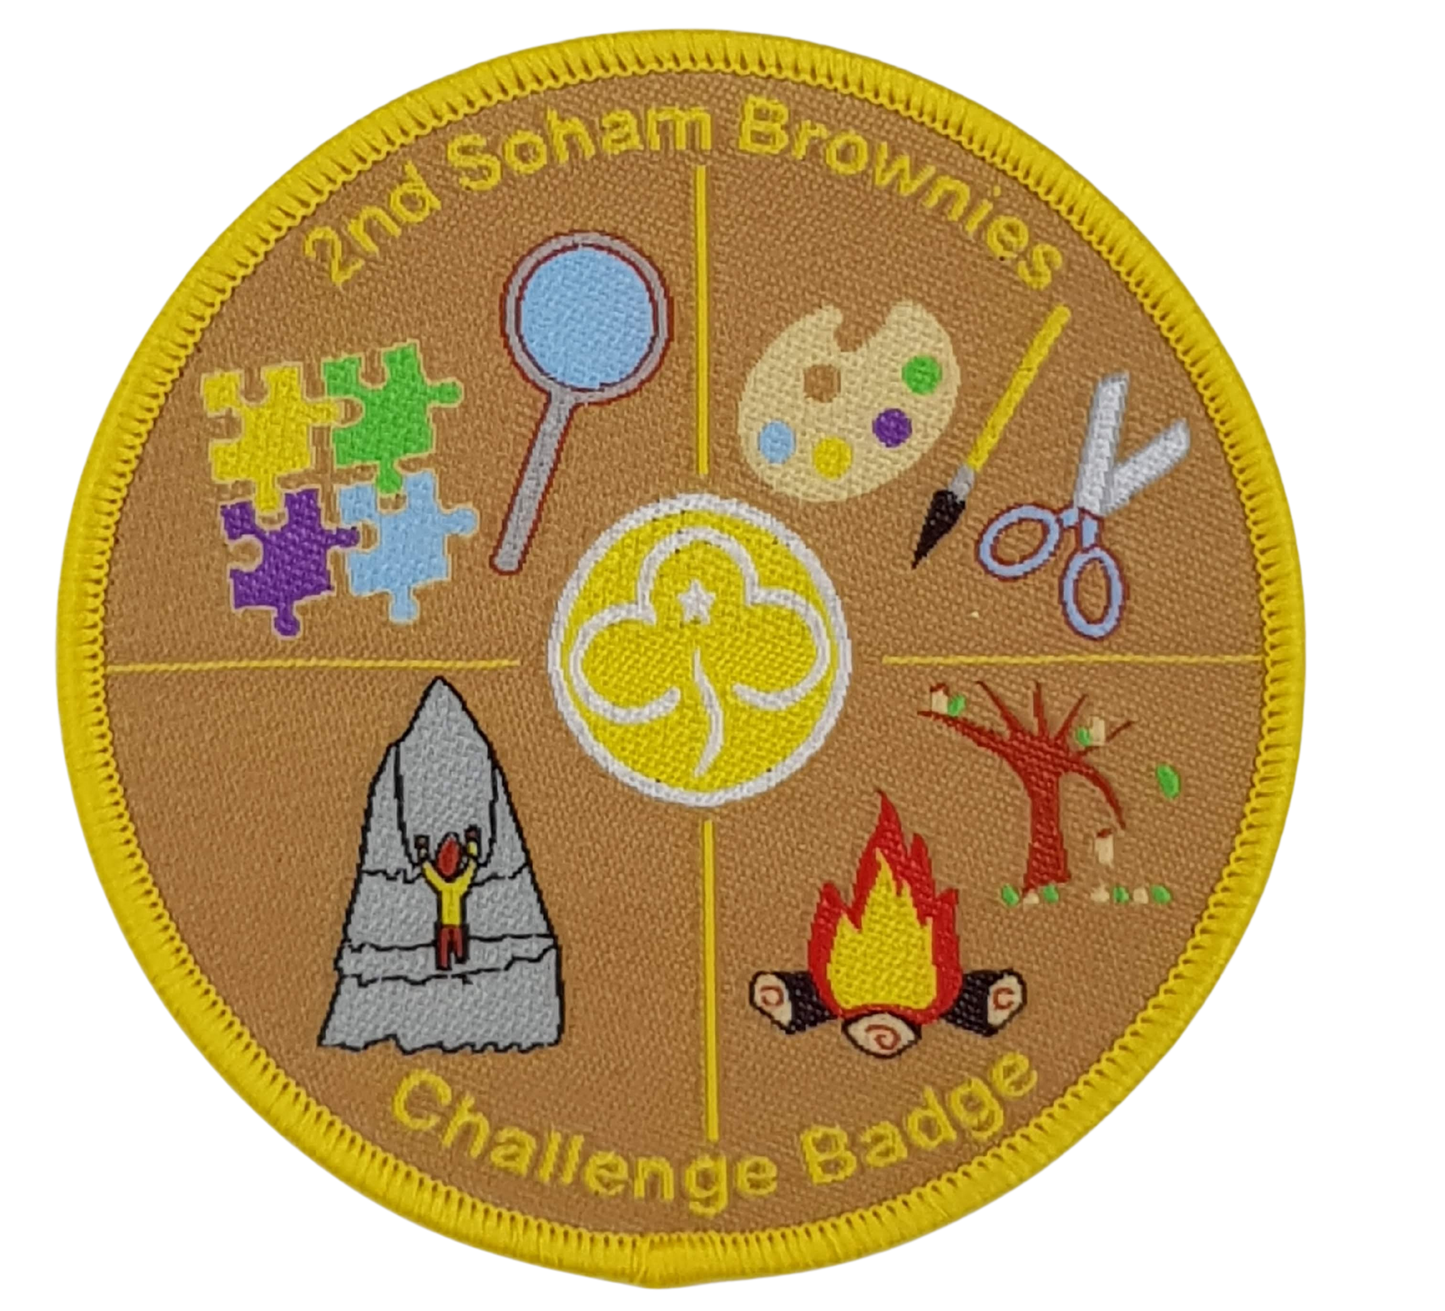 CLUB BADGES SCOUT GROUP BADGES - GIRL GUIDE BADGES BROWNIE BADGES - GROUP AND CLUB PATCHES - Lynendo Trade Store